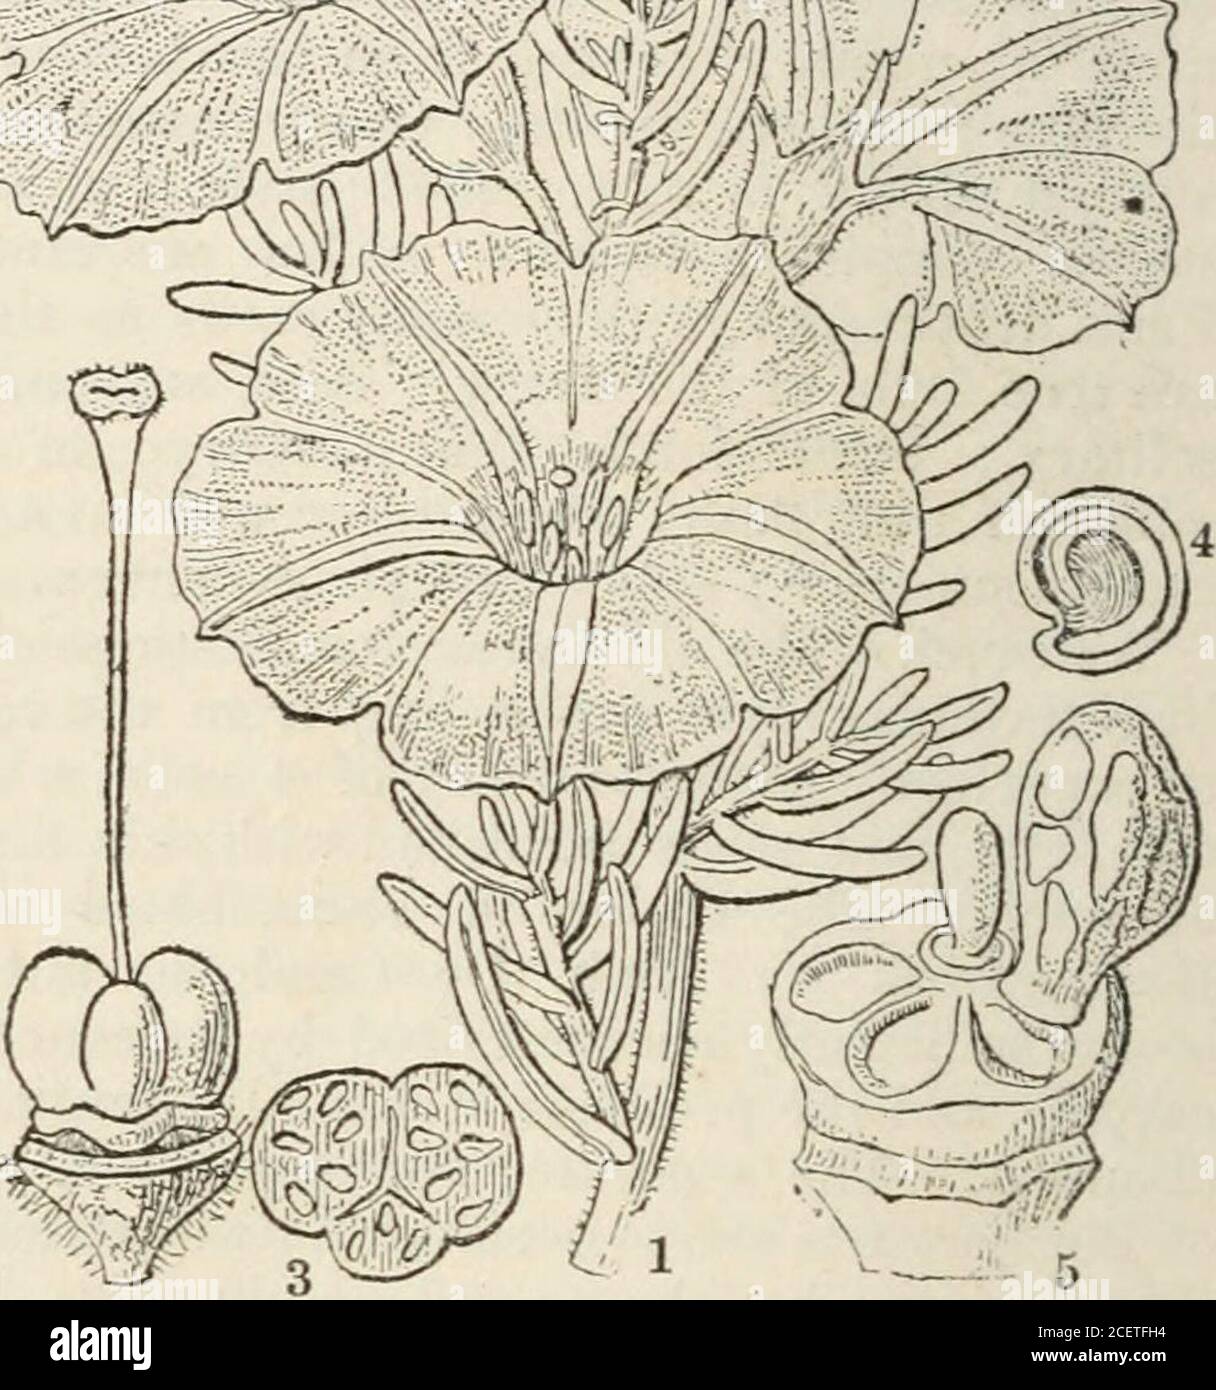 . The vegetable kingdom : or, The structure, classification, and uses of plants, illustrated upon the natural system. mbryo, they will stand among Bindweeds ; if to the carpels, amongNolanads ; but as their separate styles are nearly paralleled by those of Evolvulus andothers, it seems upon the whole better to refer them to Bindweeds. Schlechtendahlsuggests {Linncea, 7. 72) that Nolana may be referred to Nightshades, on account of itsaffinity with Grabowskia boerhaaveifolia, in which the fruit contains two bilocular meno-spermous stones ; and it must be confessed that some of the slu-ubby Nola Stock Photo